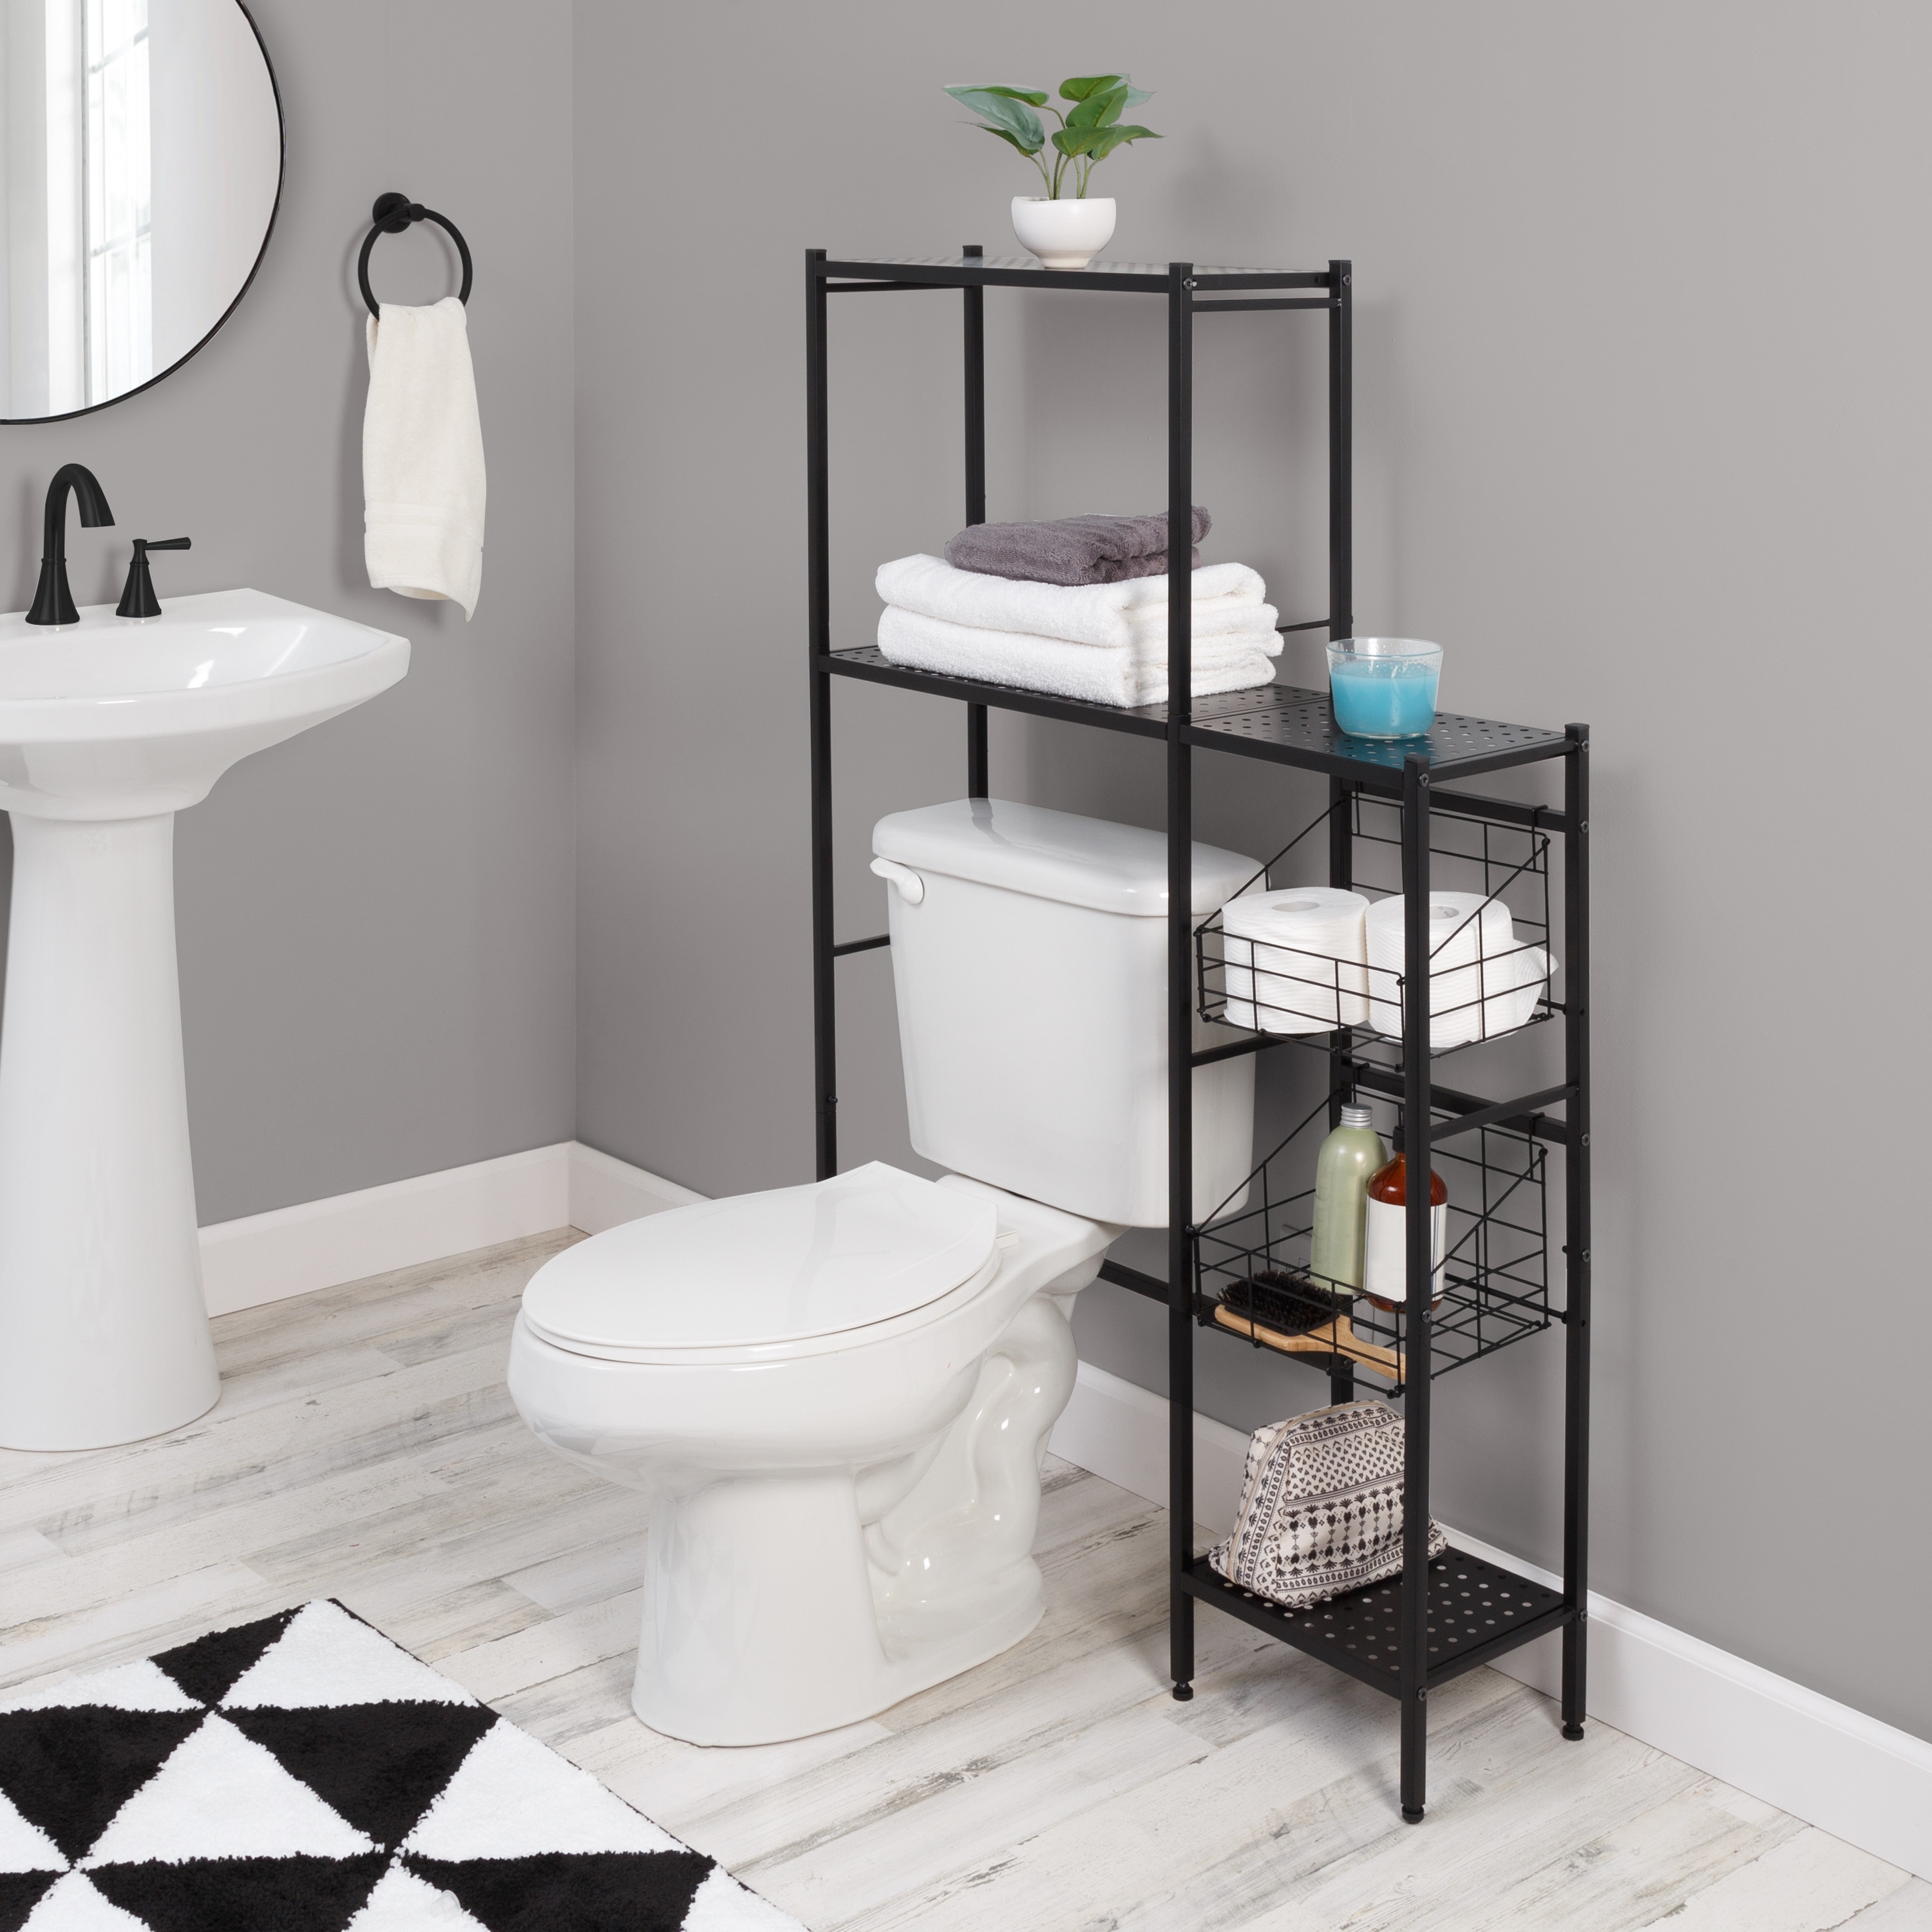 https://ak1.ostkcdn.com/images/products/is/images/direct/0e8d9d9269cb1d9d1bf926649dfc6f47333a12a7/Black-Steel-Reversible-Over-the-Toilet-Space-Saver.jpg